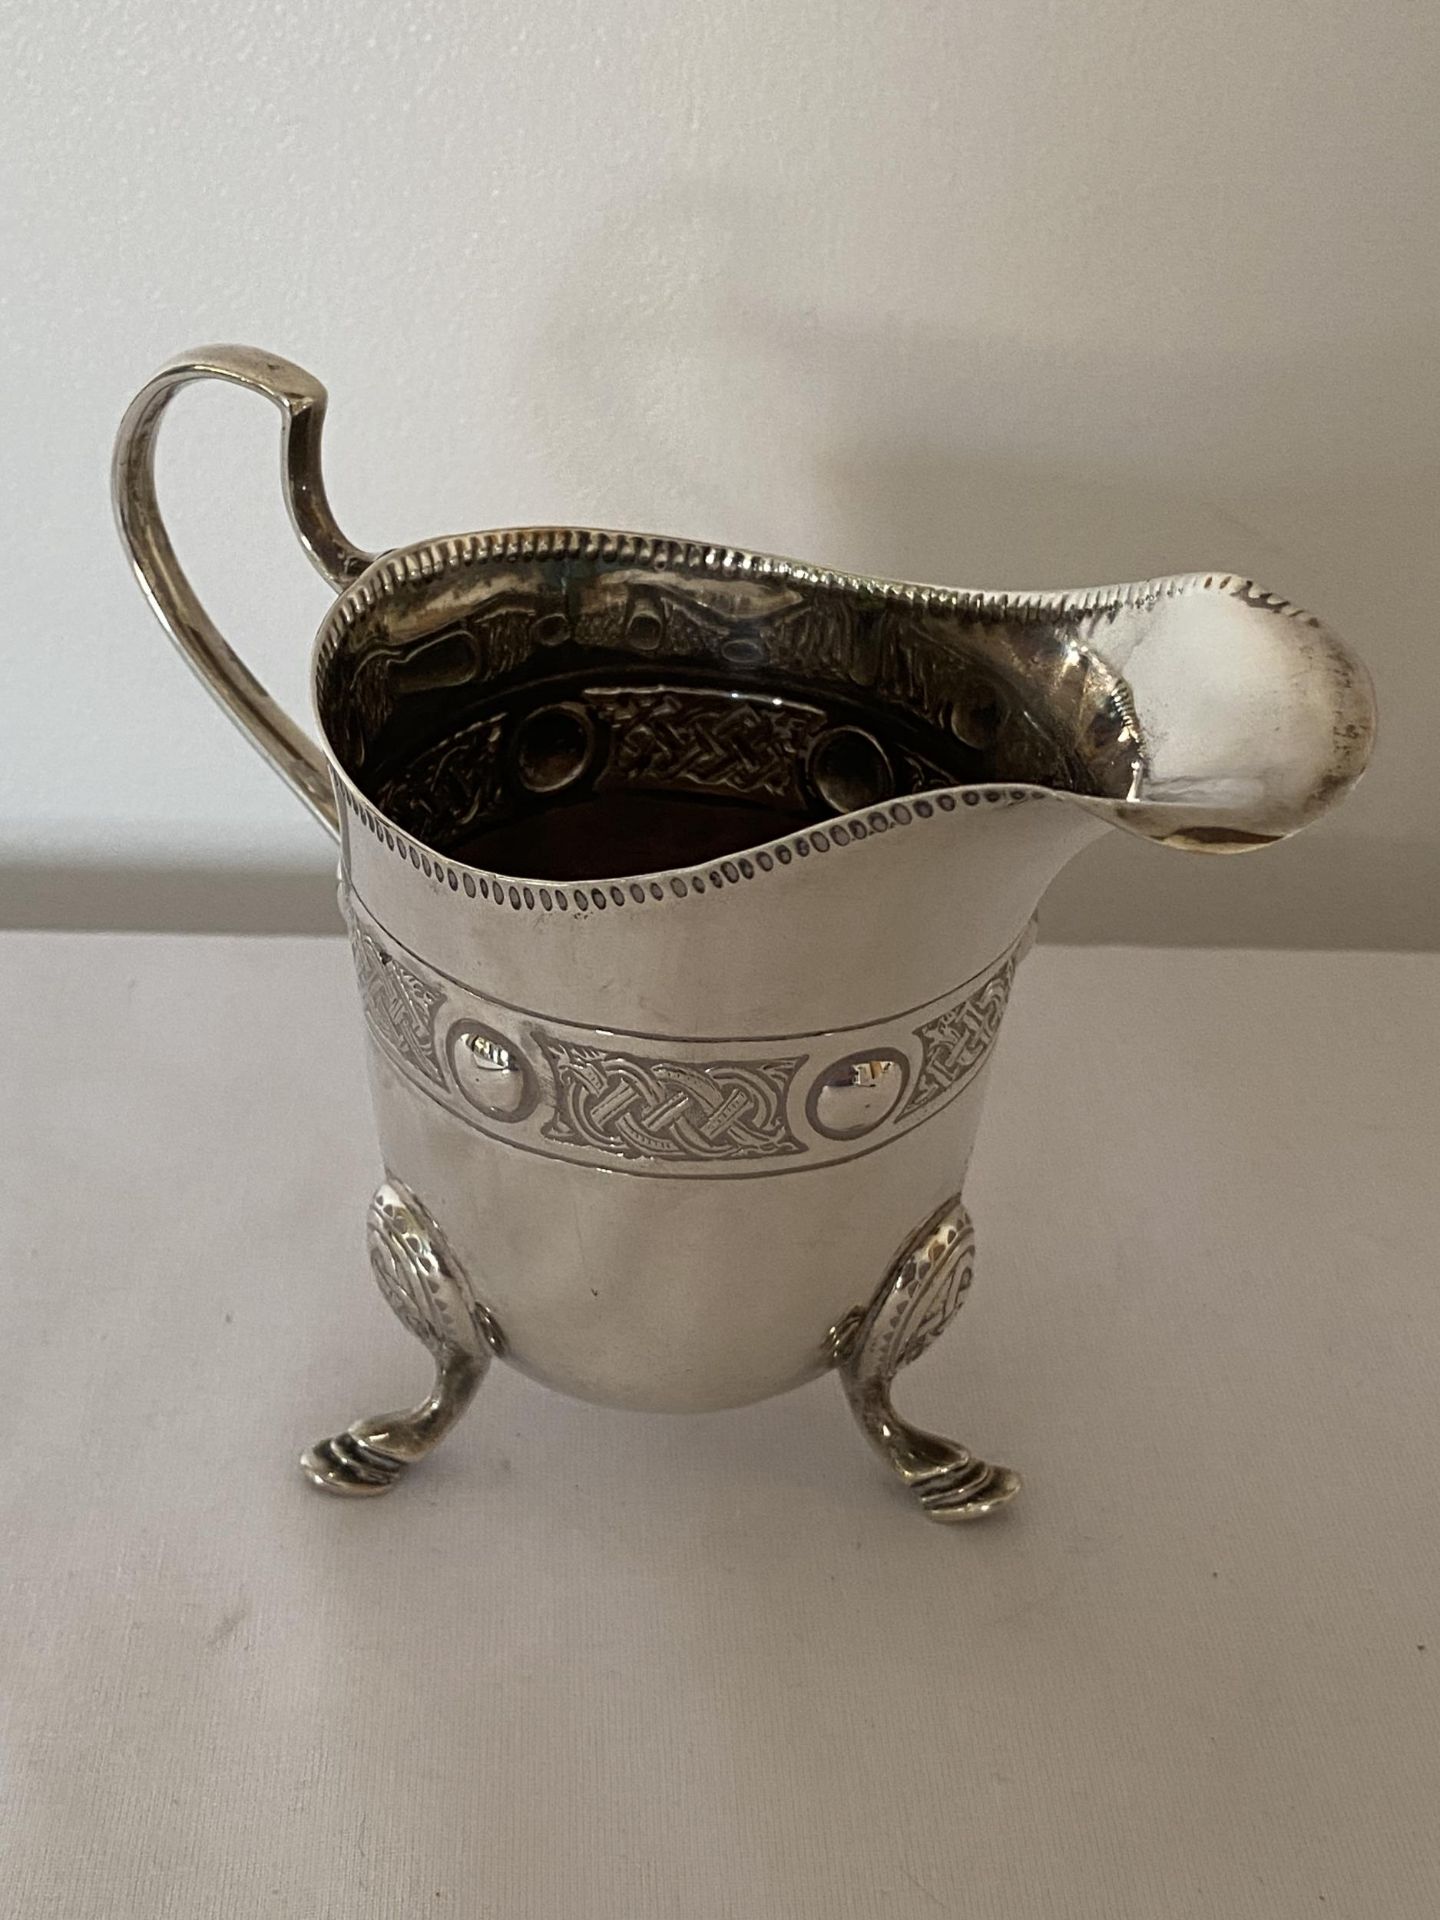 A GEORGE V 1917 HALLMARKED DUBLIN SILVER TANKARD, MAKER T WEIR & SONS, GROSS WEIGHT 163 GRAMS - Image 4 of 12